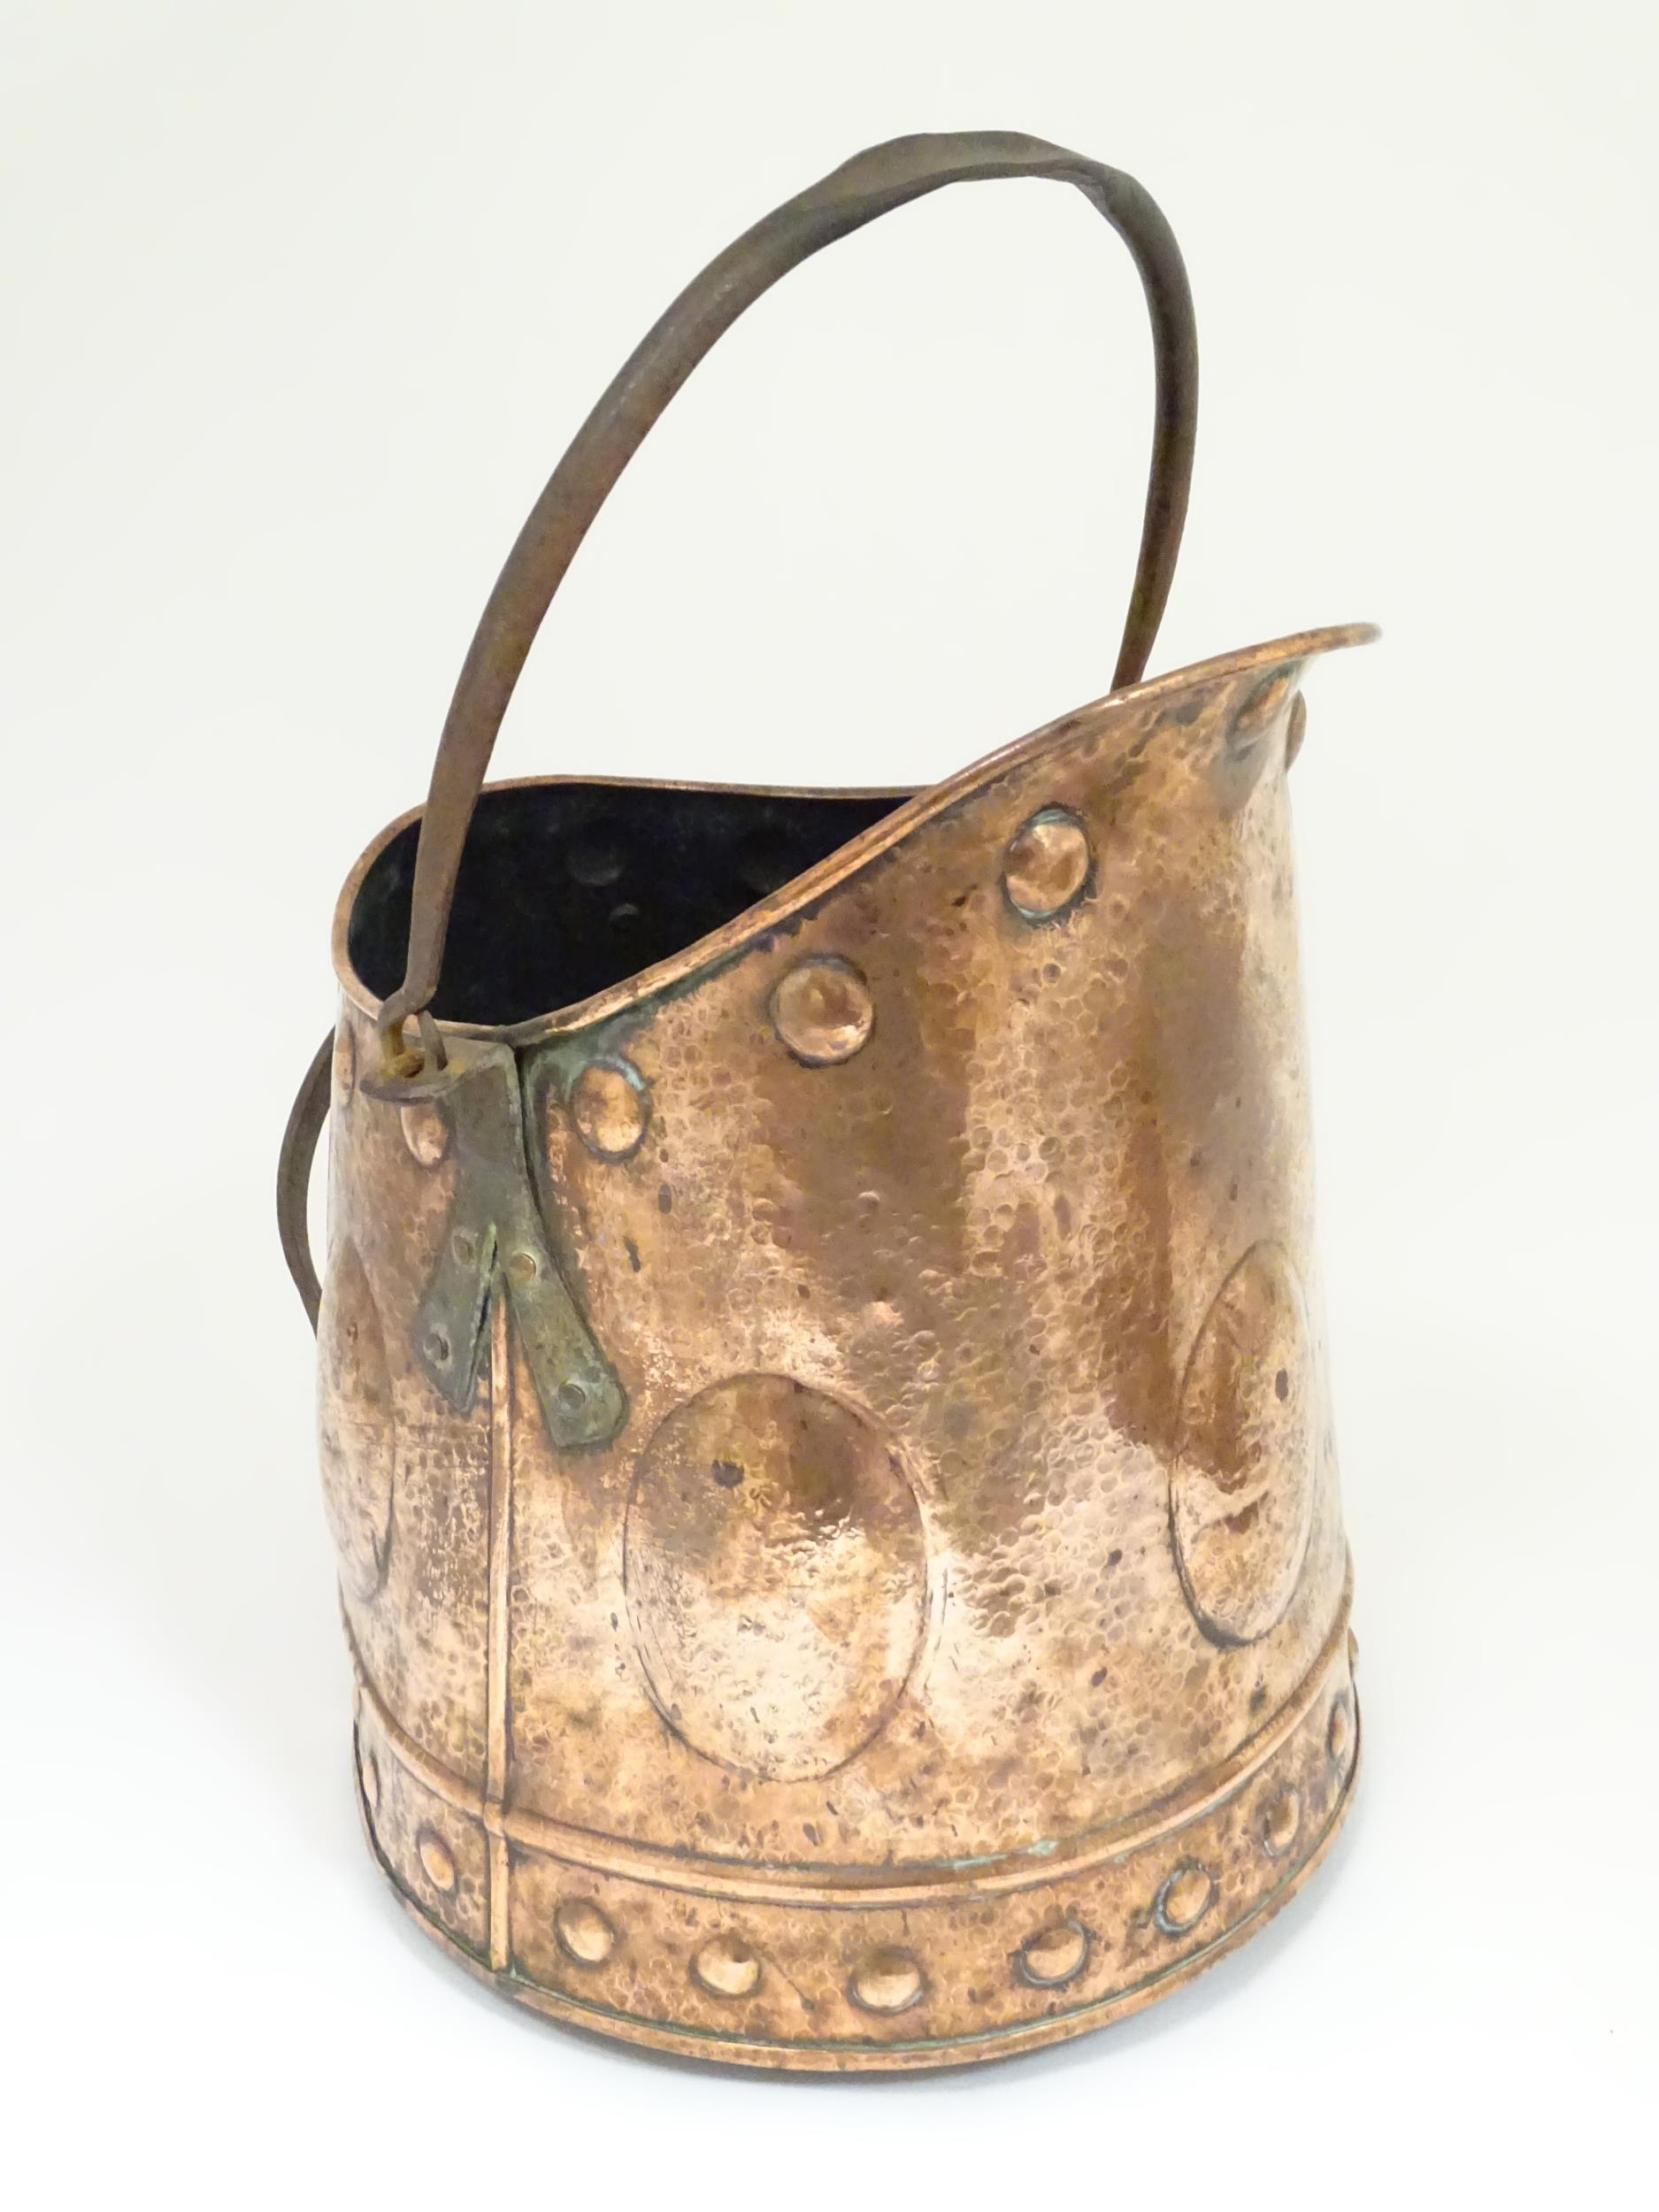 An Arts & Crafts cooper coal scuttle with swing handle and hammered decoration. Approx. 15 1/4" high - Image 3 of 6